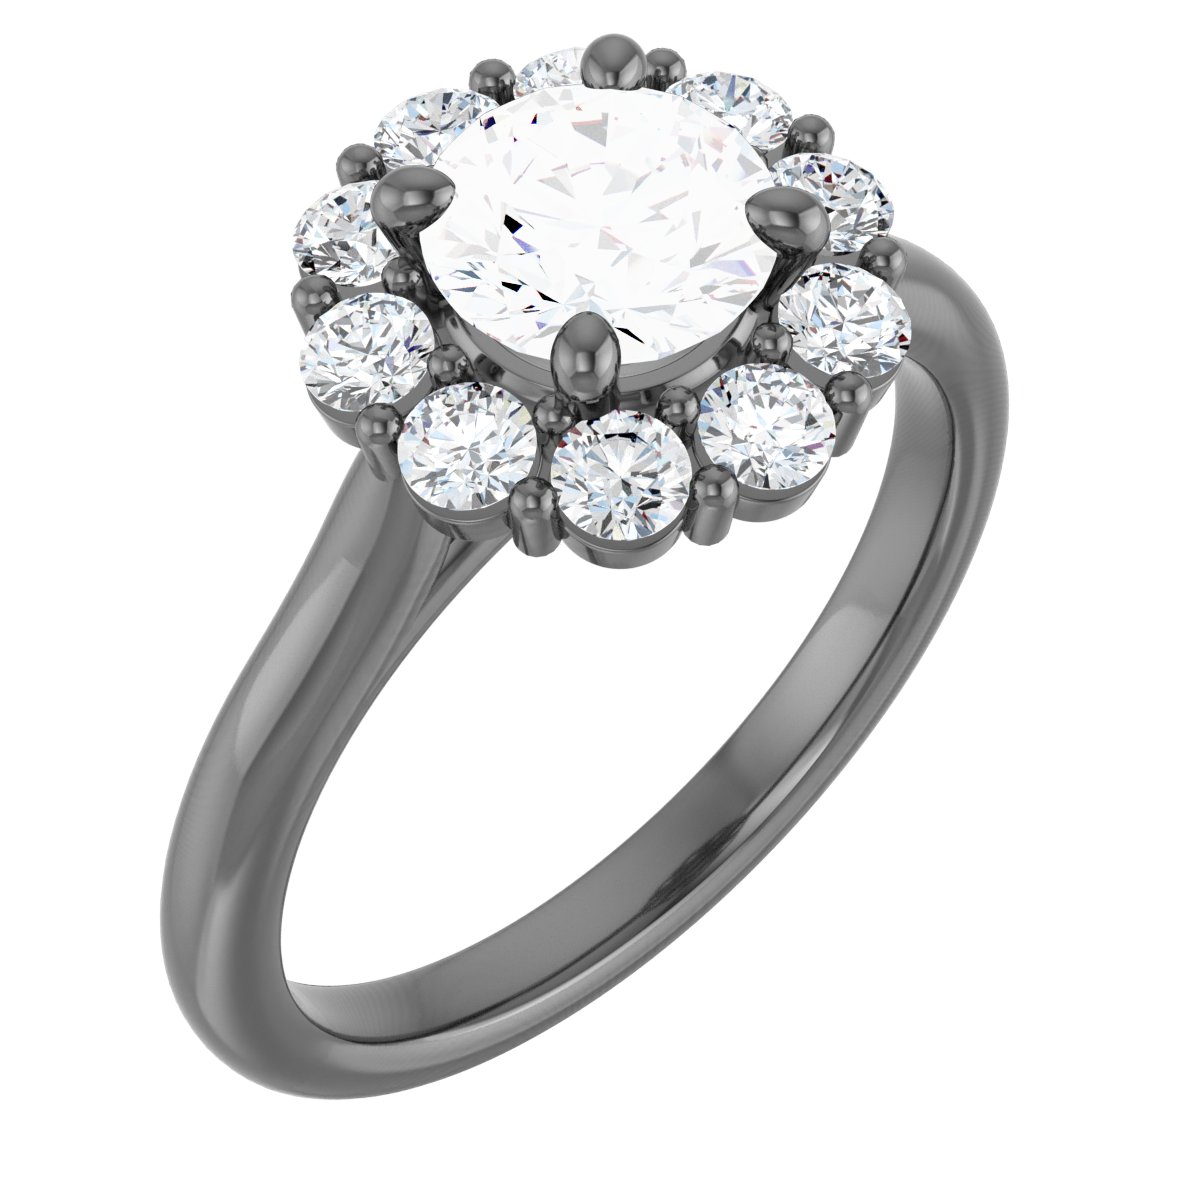 124568 / Engagement Ring / Neosadený / Sterling Silver / round / 5.2 Mm / Polished / Halo-Style Engagement Ring Mounting